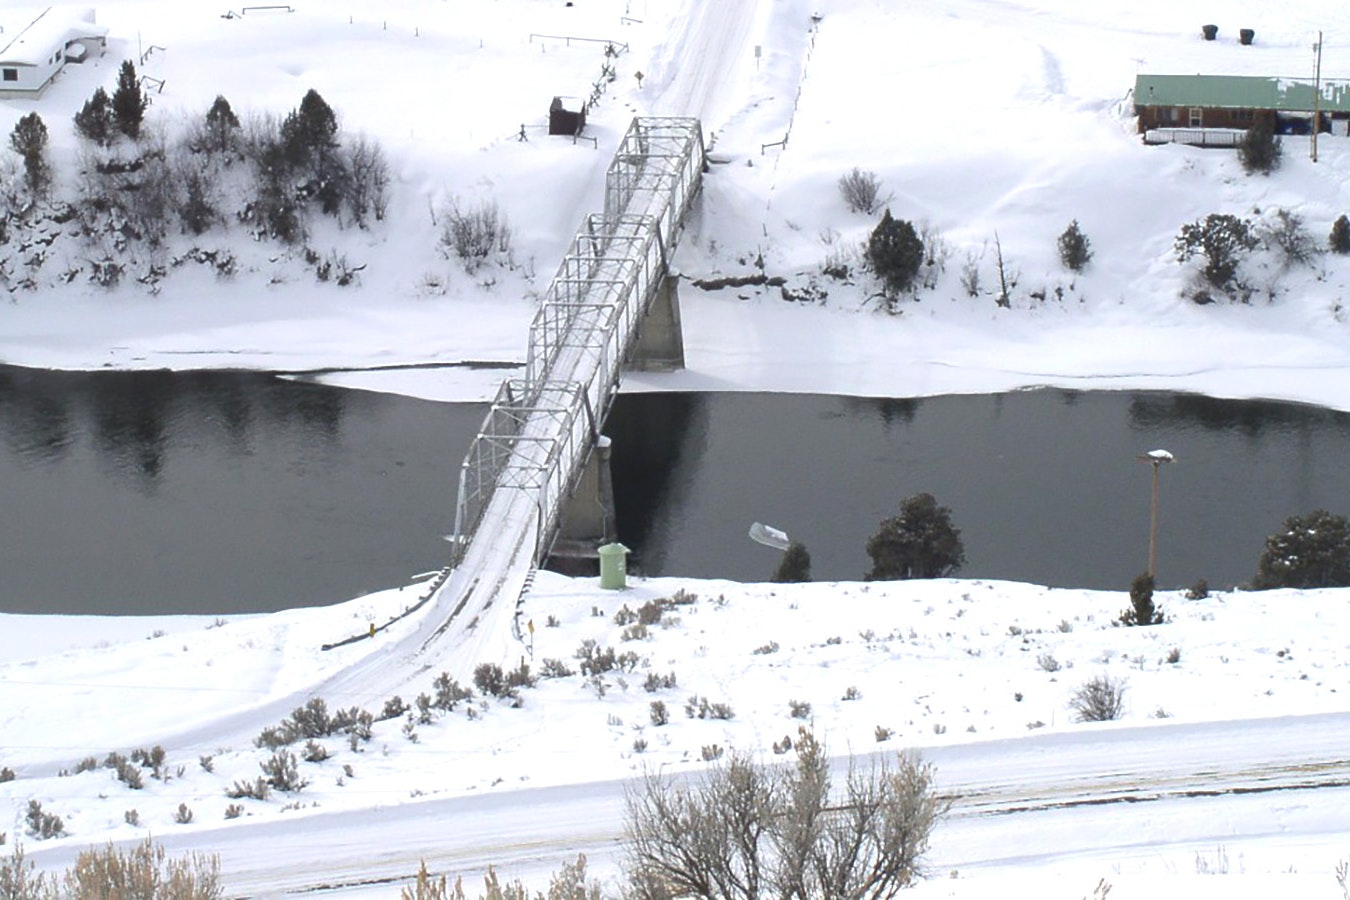 The Swinging Bridge near Jackson that spans the Snake River is being removed this week to make way for a new bridge. It's a local transportation icon that's been in place since 1960. Even then, it was built from repurposed trusses of the old Wilson River Bridge.